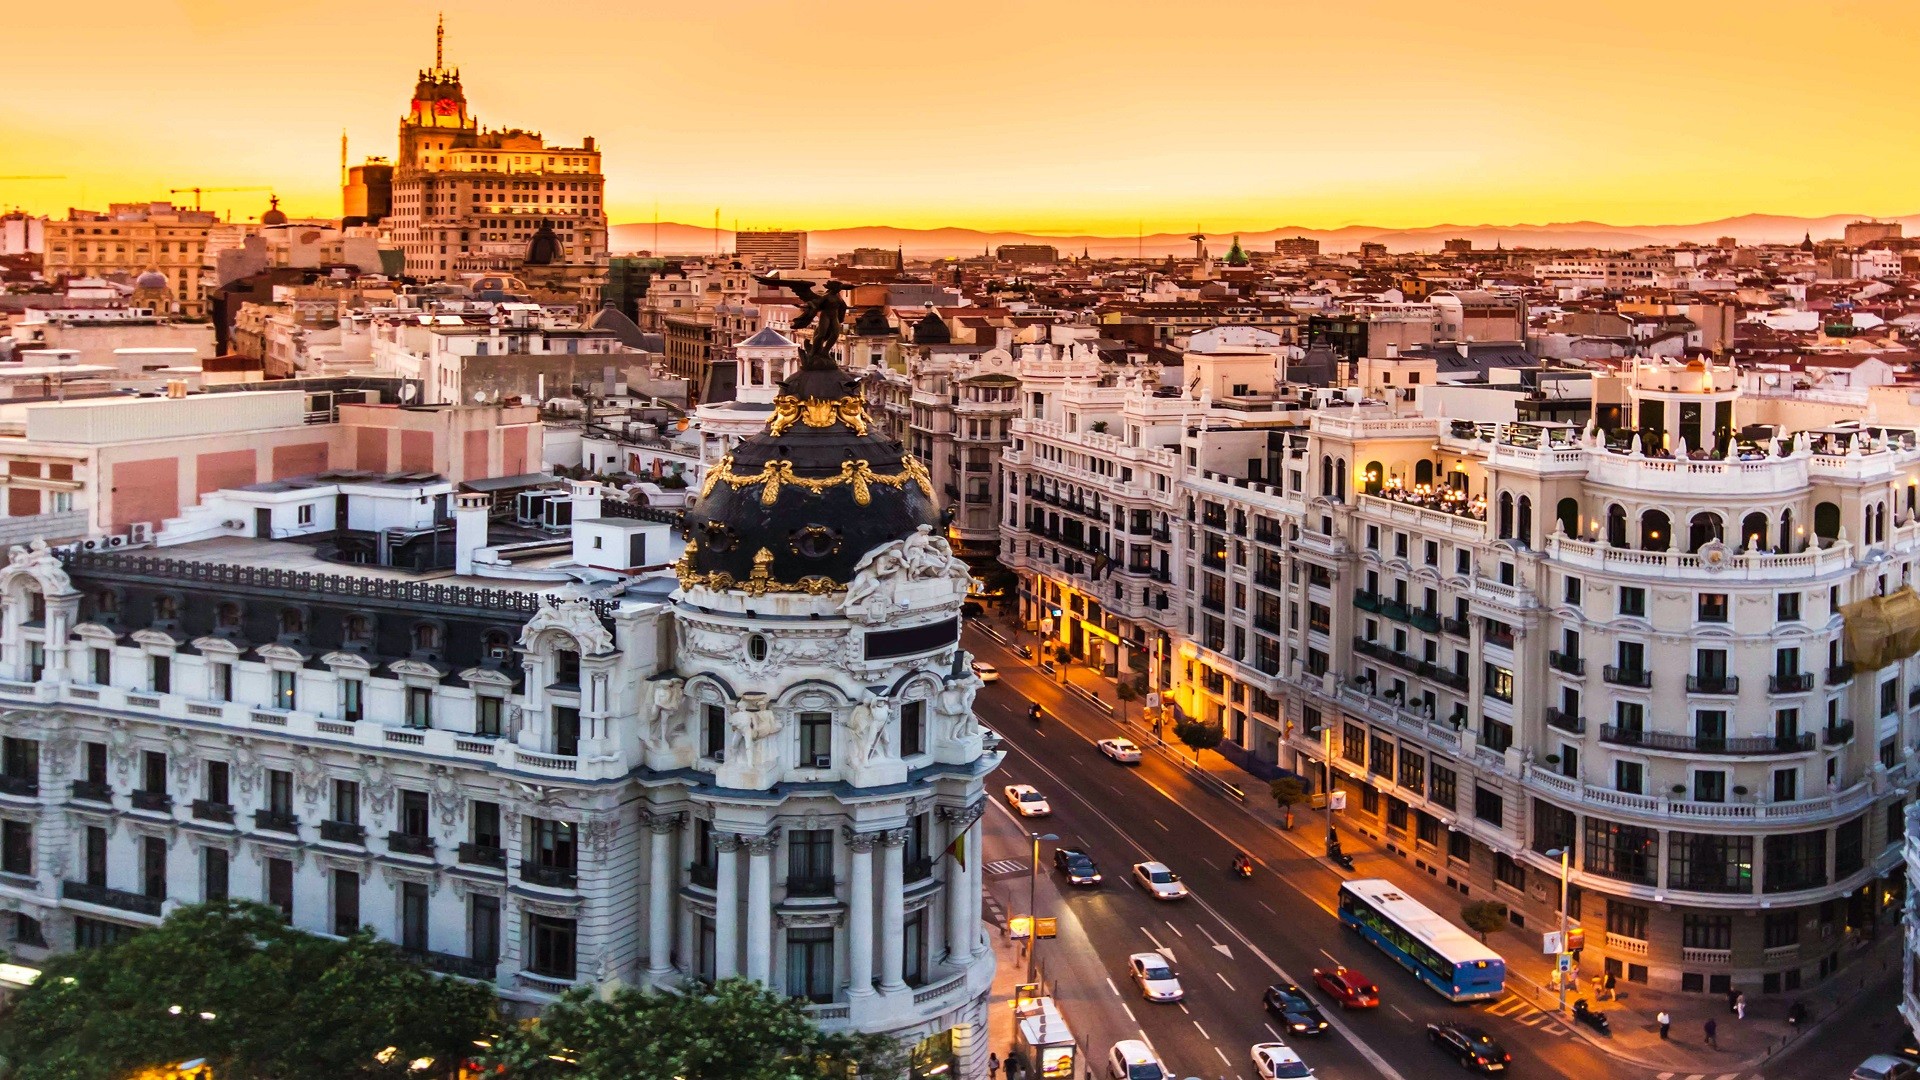 General 1920x1080 city cityscape sunset road car architecture Madrid Spain Europe street urban building